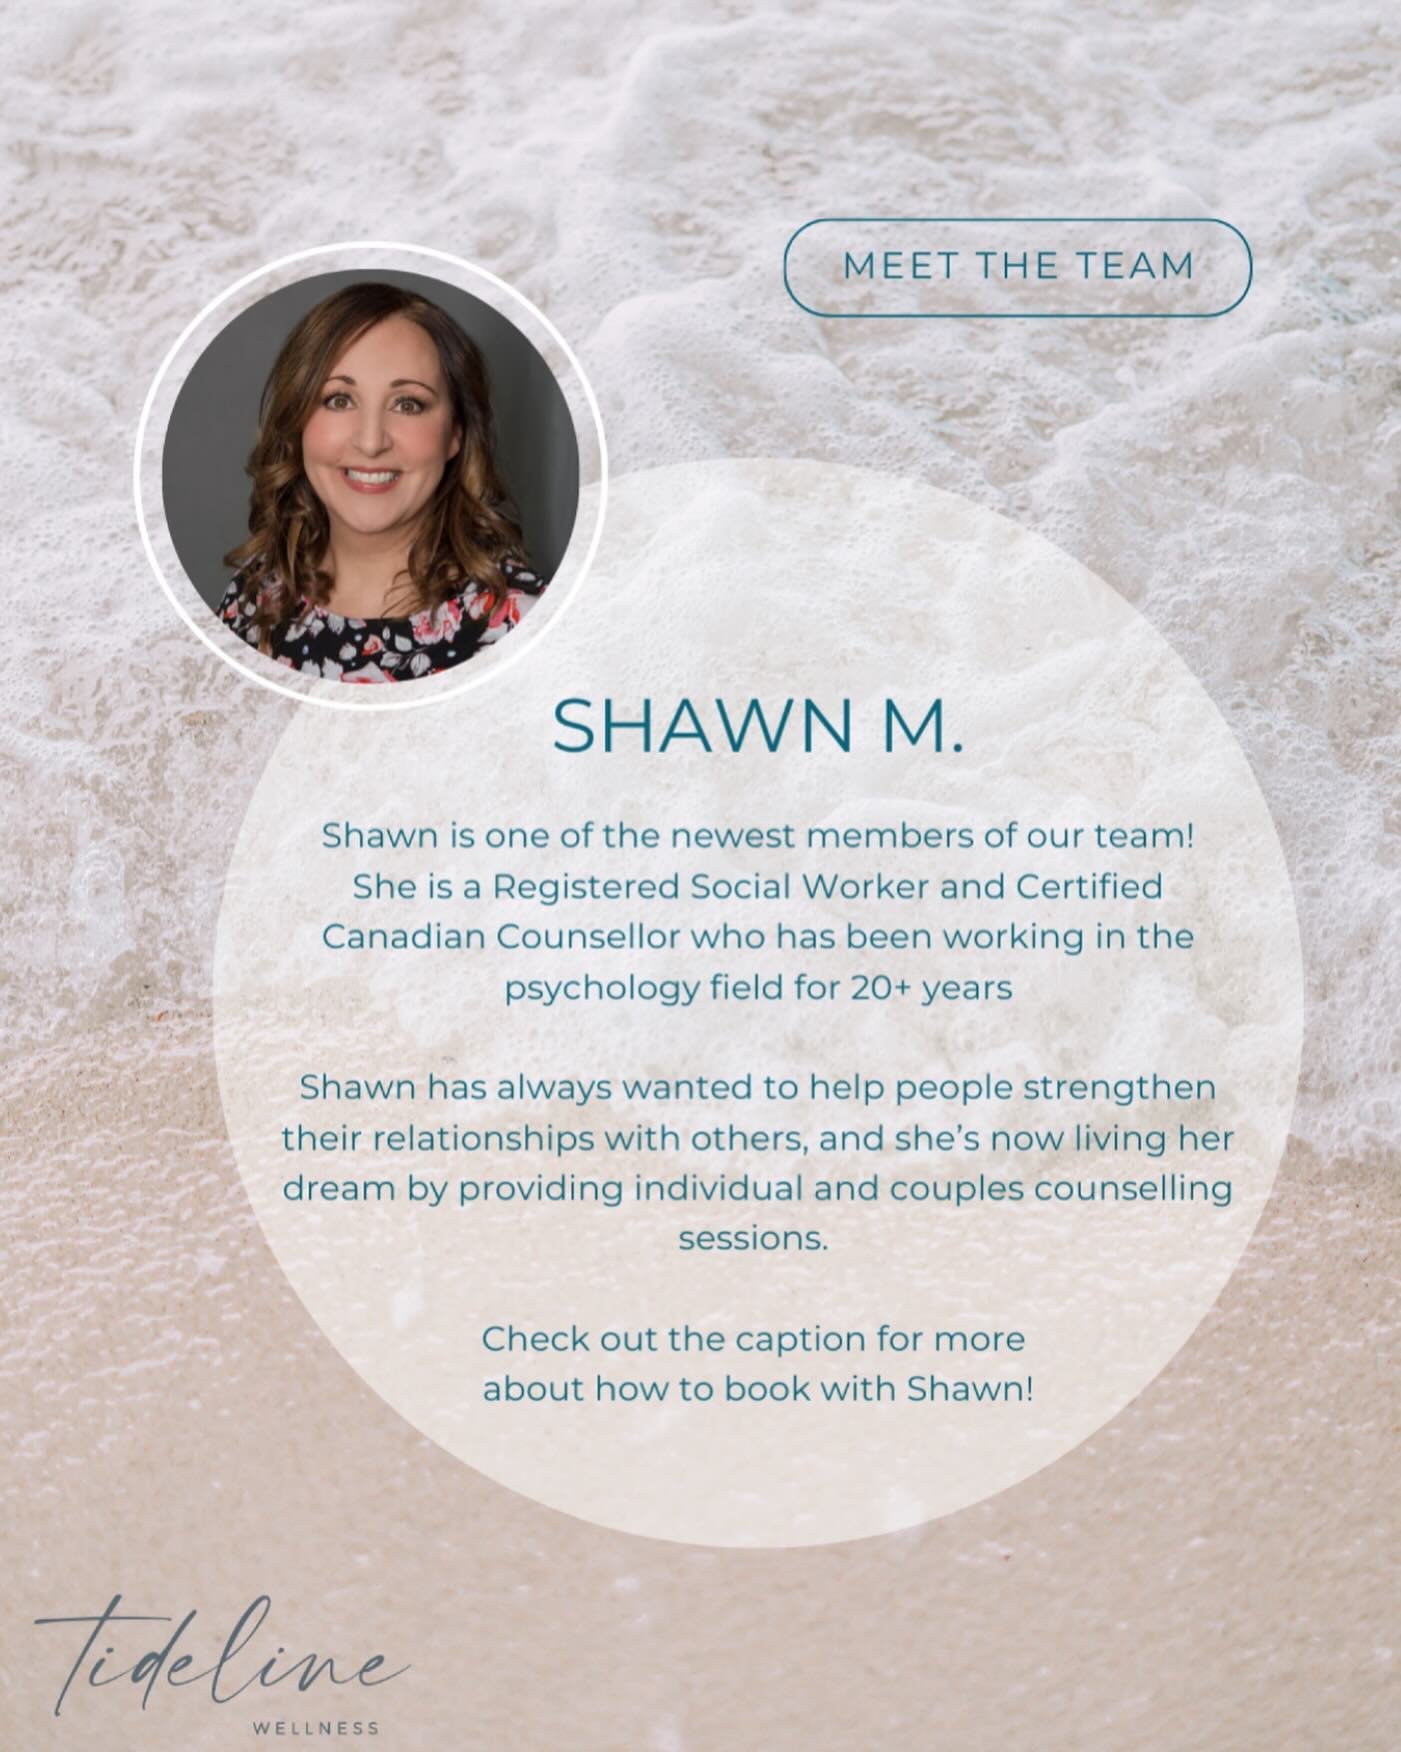 Meet Shawn Michaud - one of the newest members of the @tidelinewellness team 🌸

Shawn is a Registered Social Worker and Certified Canadian Counsellor who has been working in the psychology field for 20+ years

Shawn has always wanted to help people 